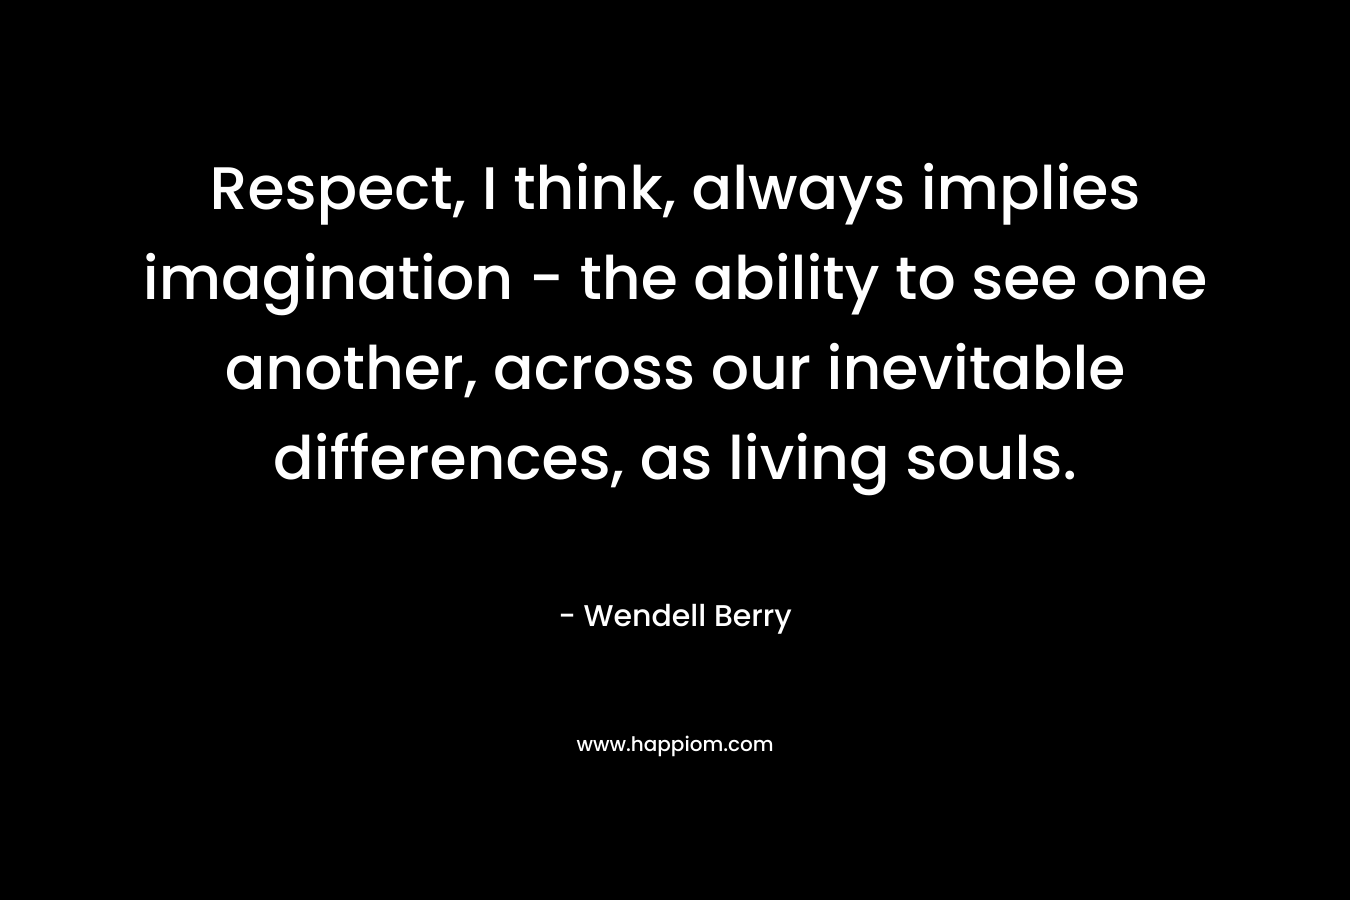 Respect, I think, always implies imagination - the ability to see one another, across our inevitable differences, as living souls.